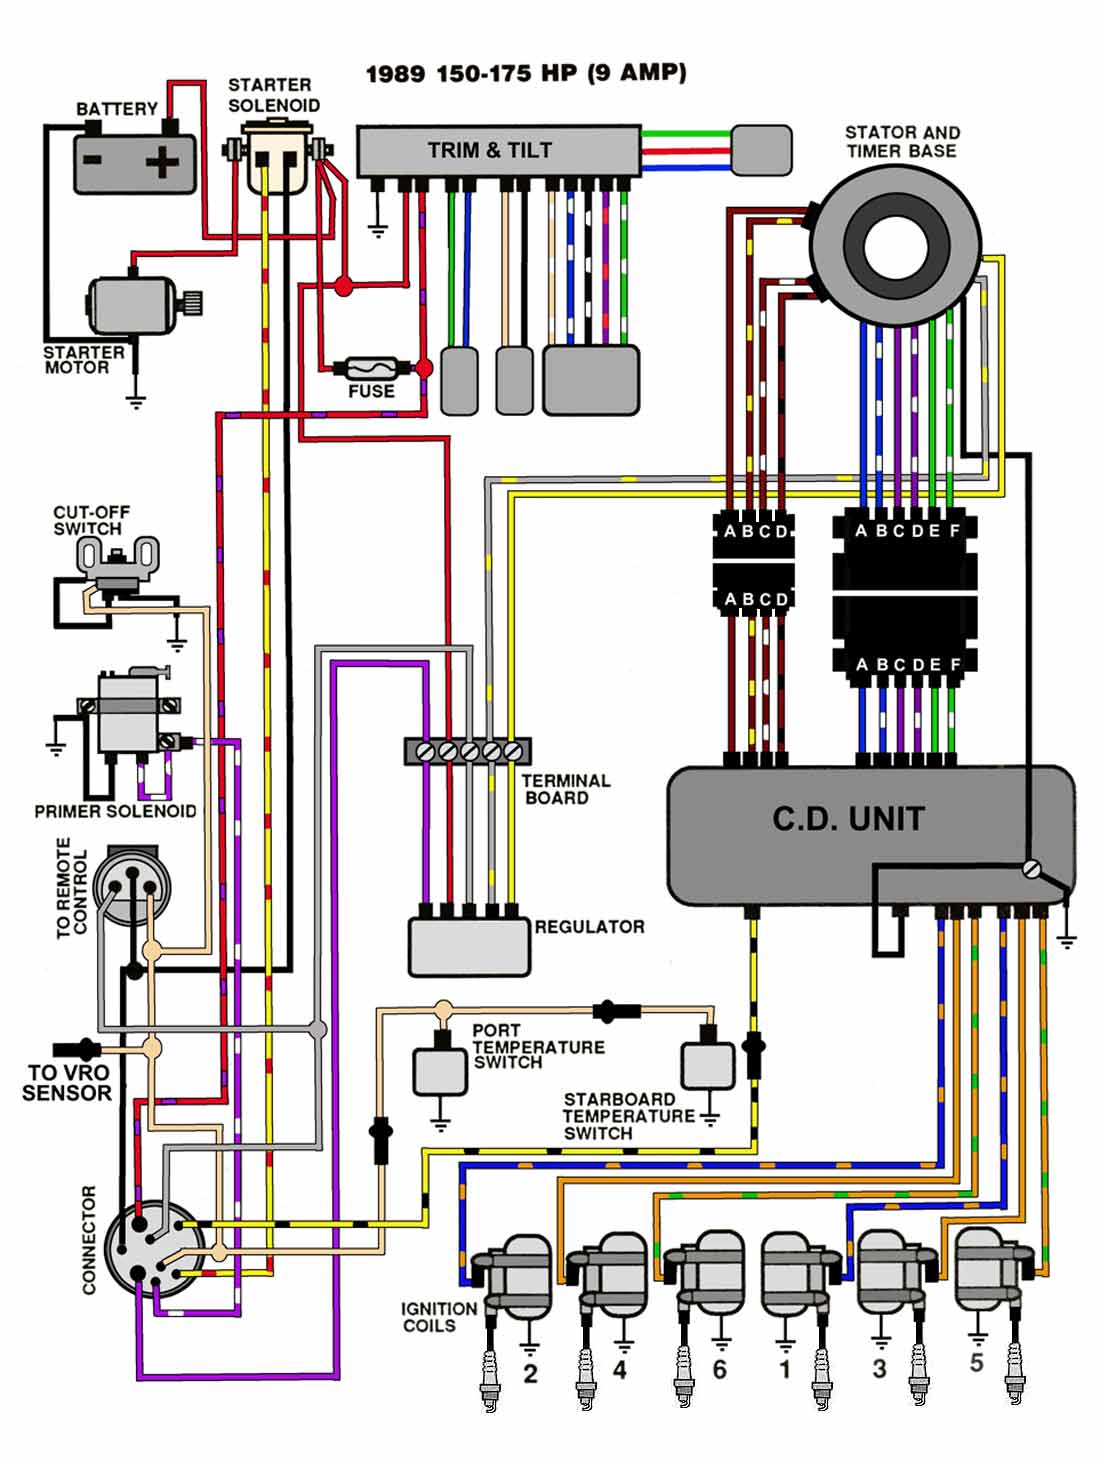 Wiring Diagram For Ignition Switch For 2009 Nitro Z7 With 150 Optimax from maxrules.com